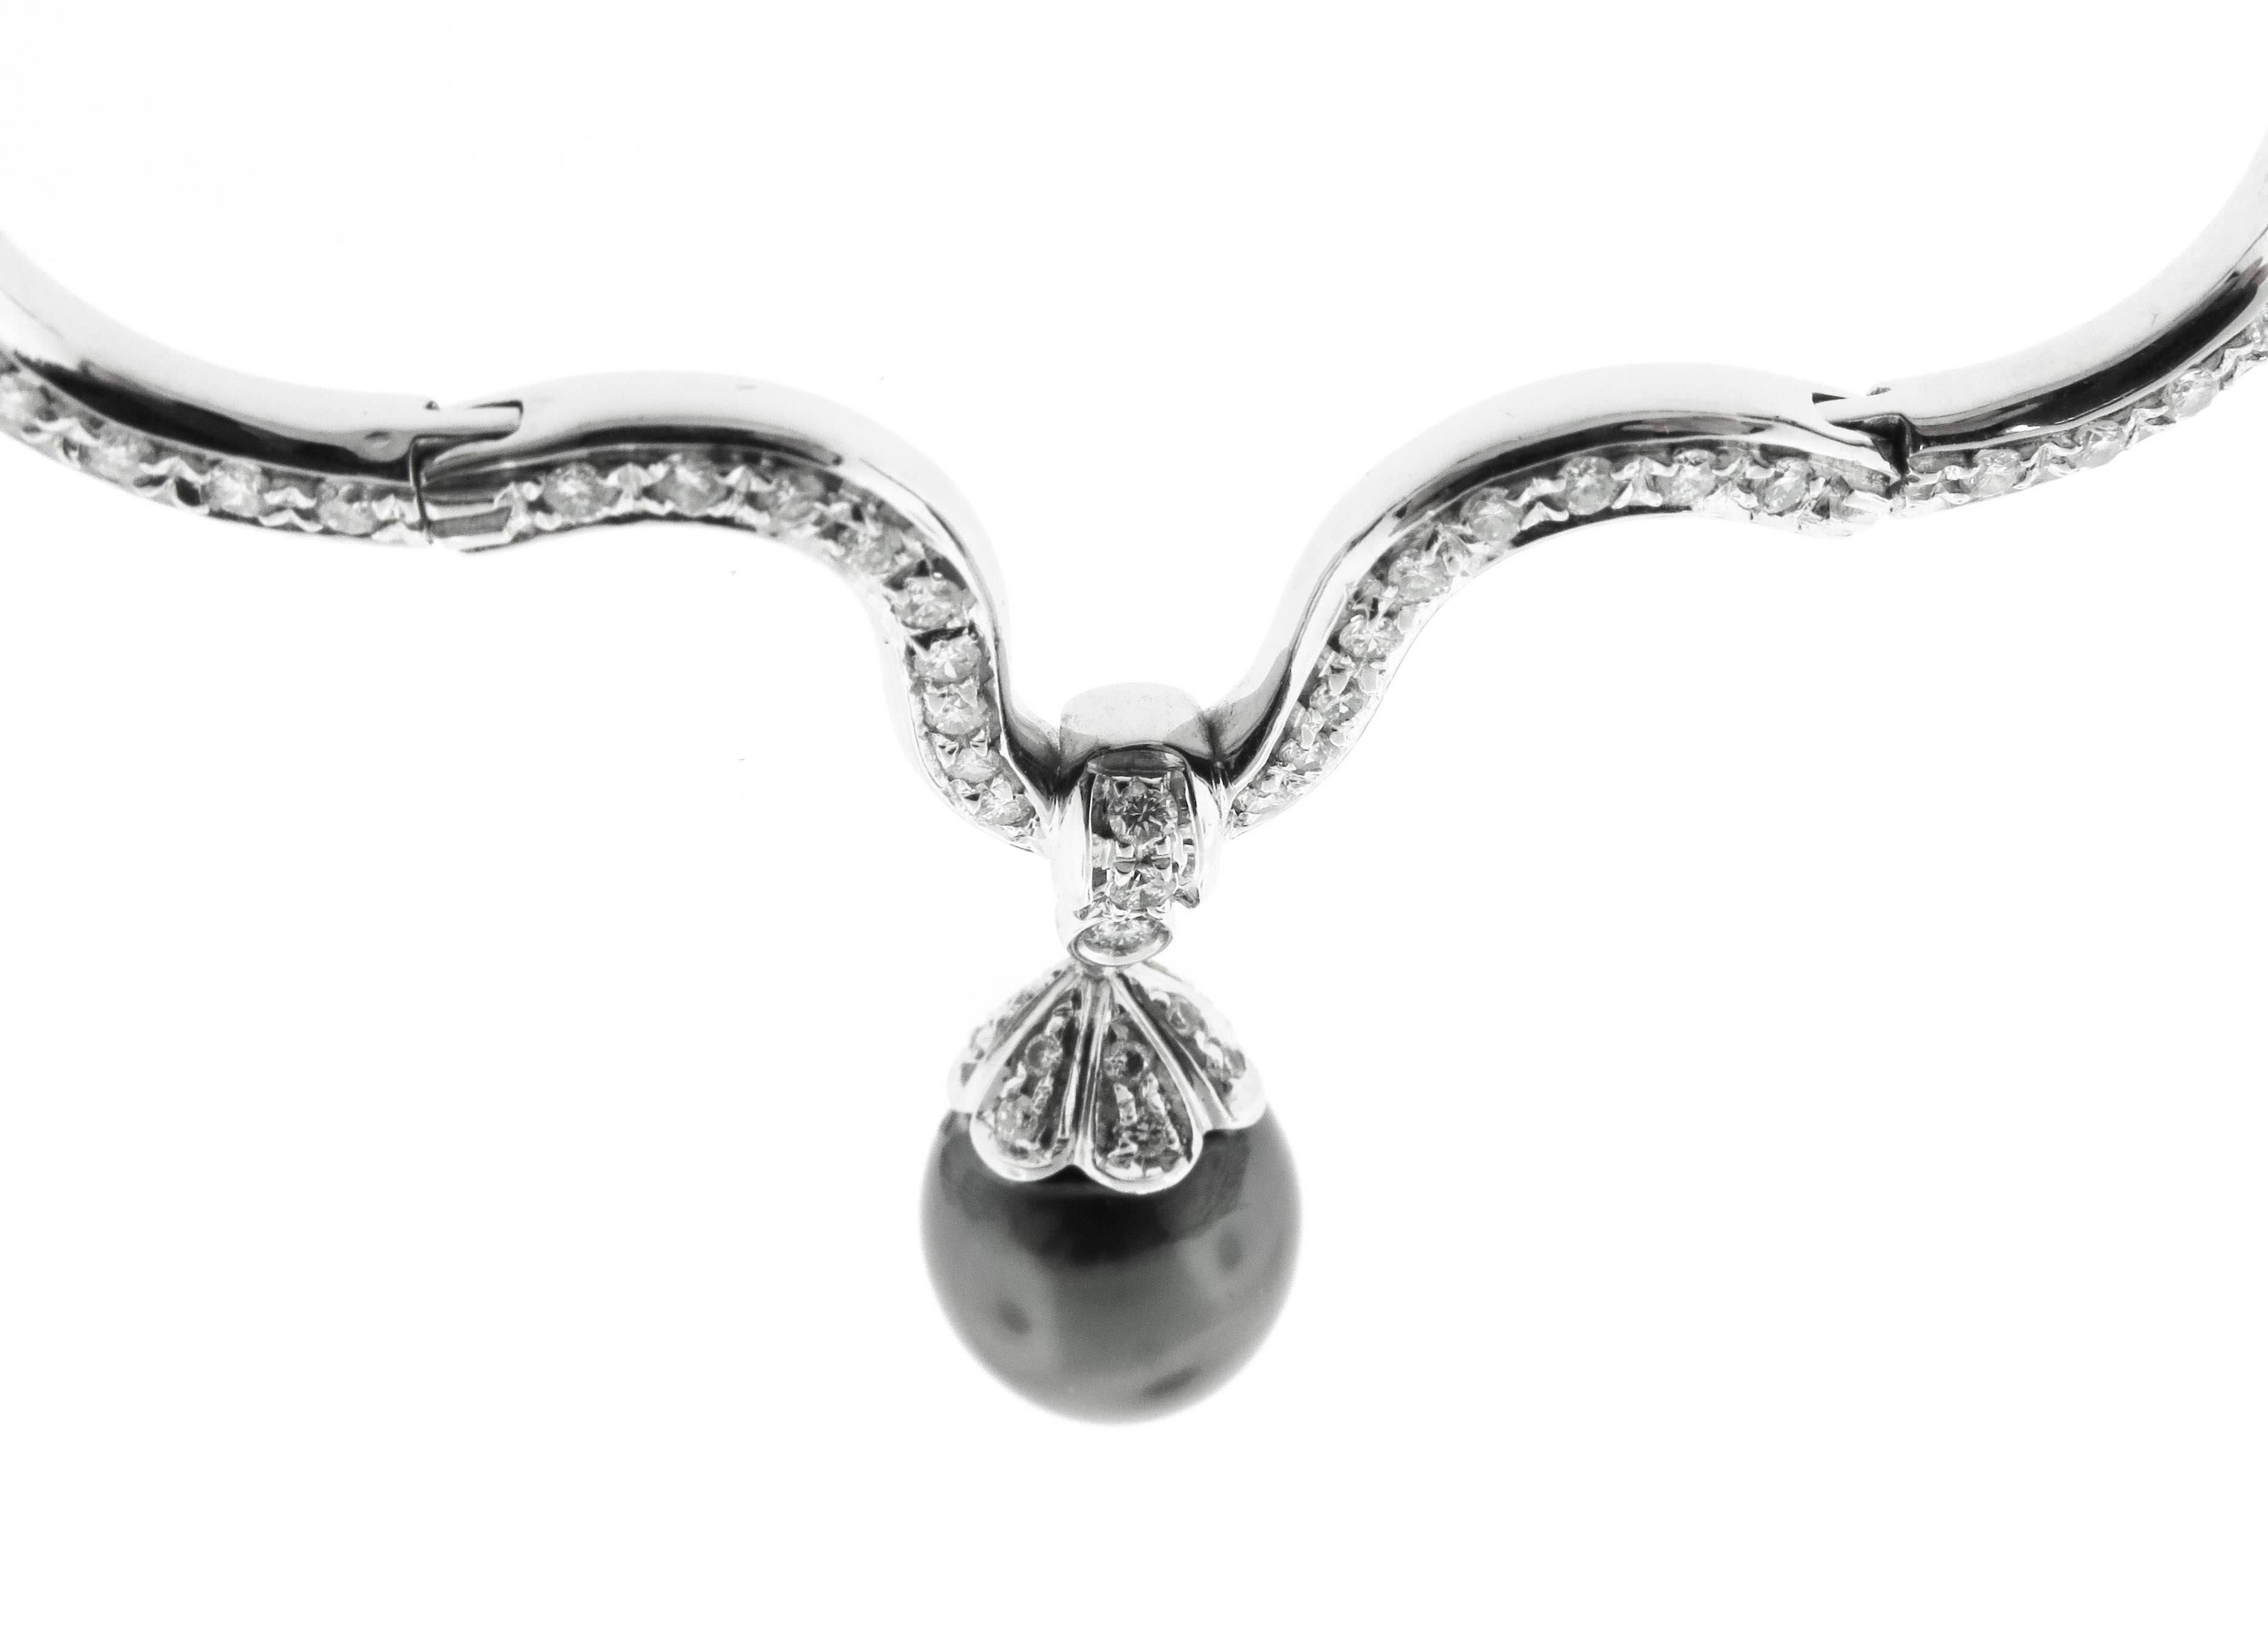 Majestic, memorable and tasteful, this fabulous 18K white gold necklace is a truly fascinating sight to behold, boasting a gorgeous Black Tahitian Pearl Drop which centers an Impressive wave of Diamonds glittering all the way up to the the half-way